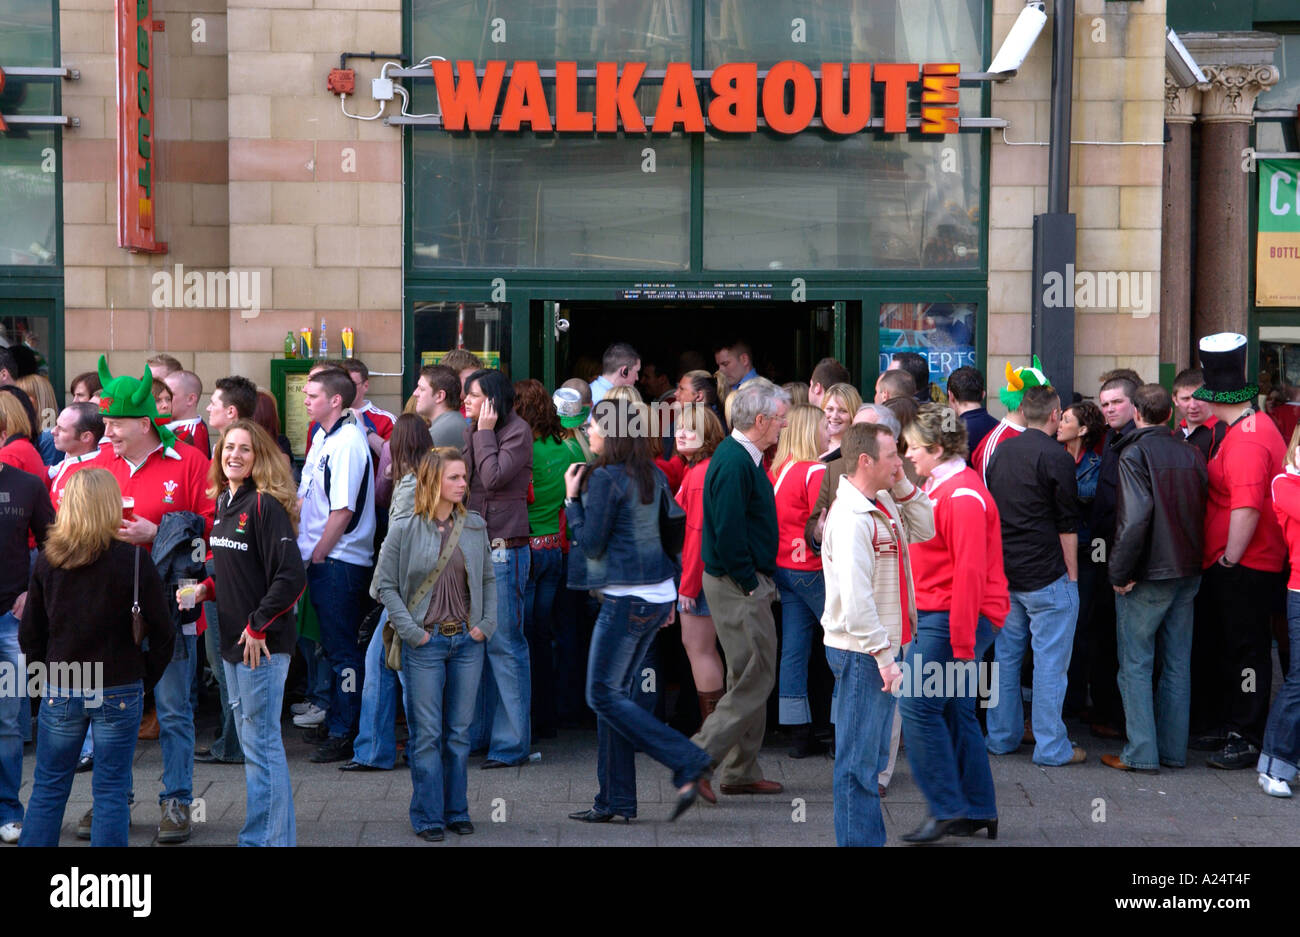 Rugby fans outside WALKABOUT INN queuing to get into pubs and bars in Cardiff on the day of a Wales international match Stock Photo